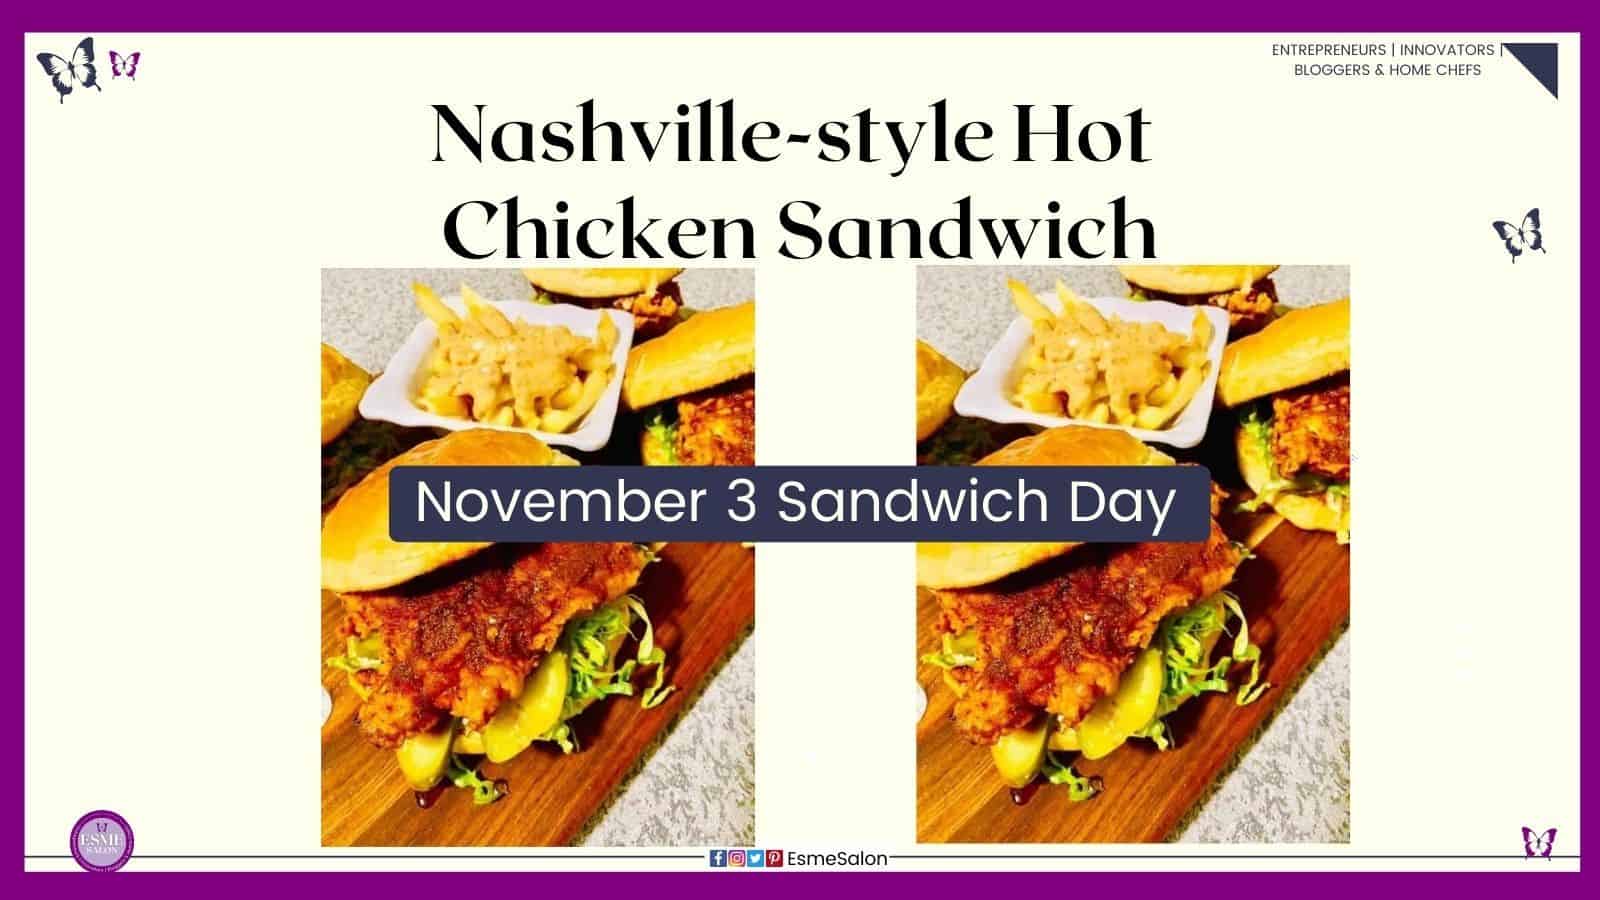 an image of a Nashville Hot Chicken Sandwich on a brioche bun with fries on the side